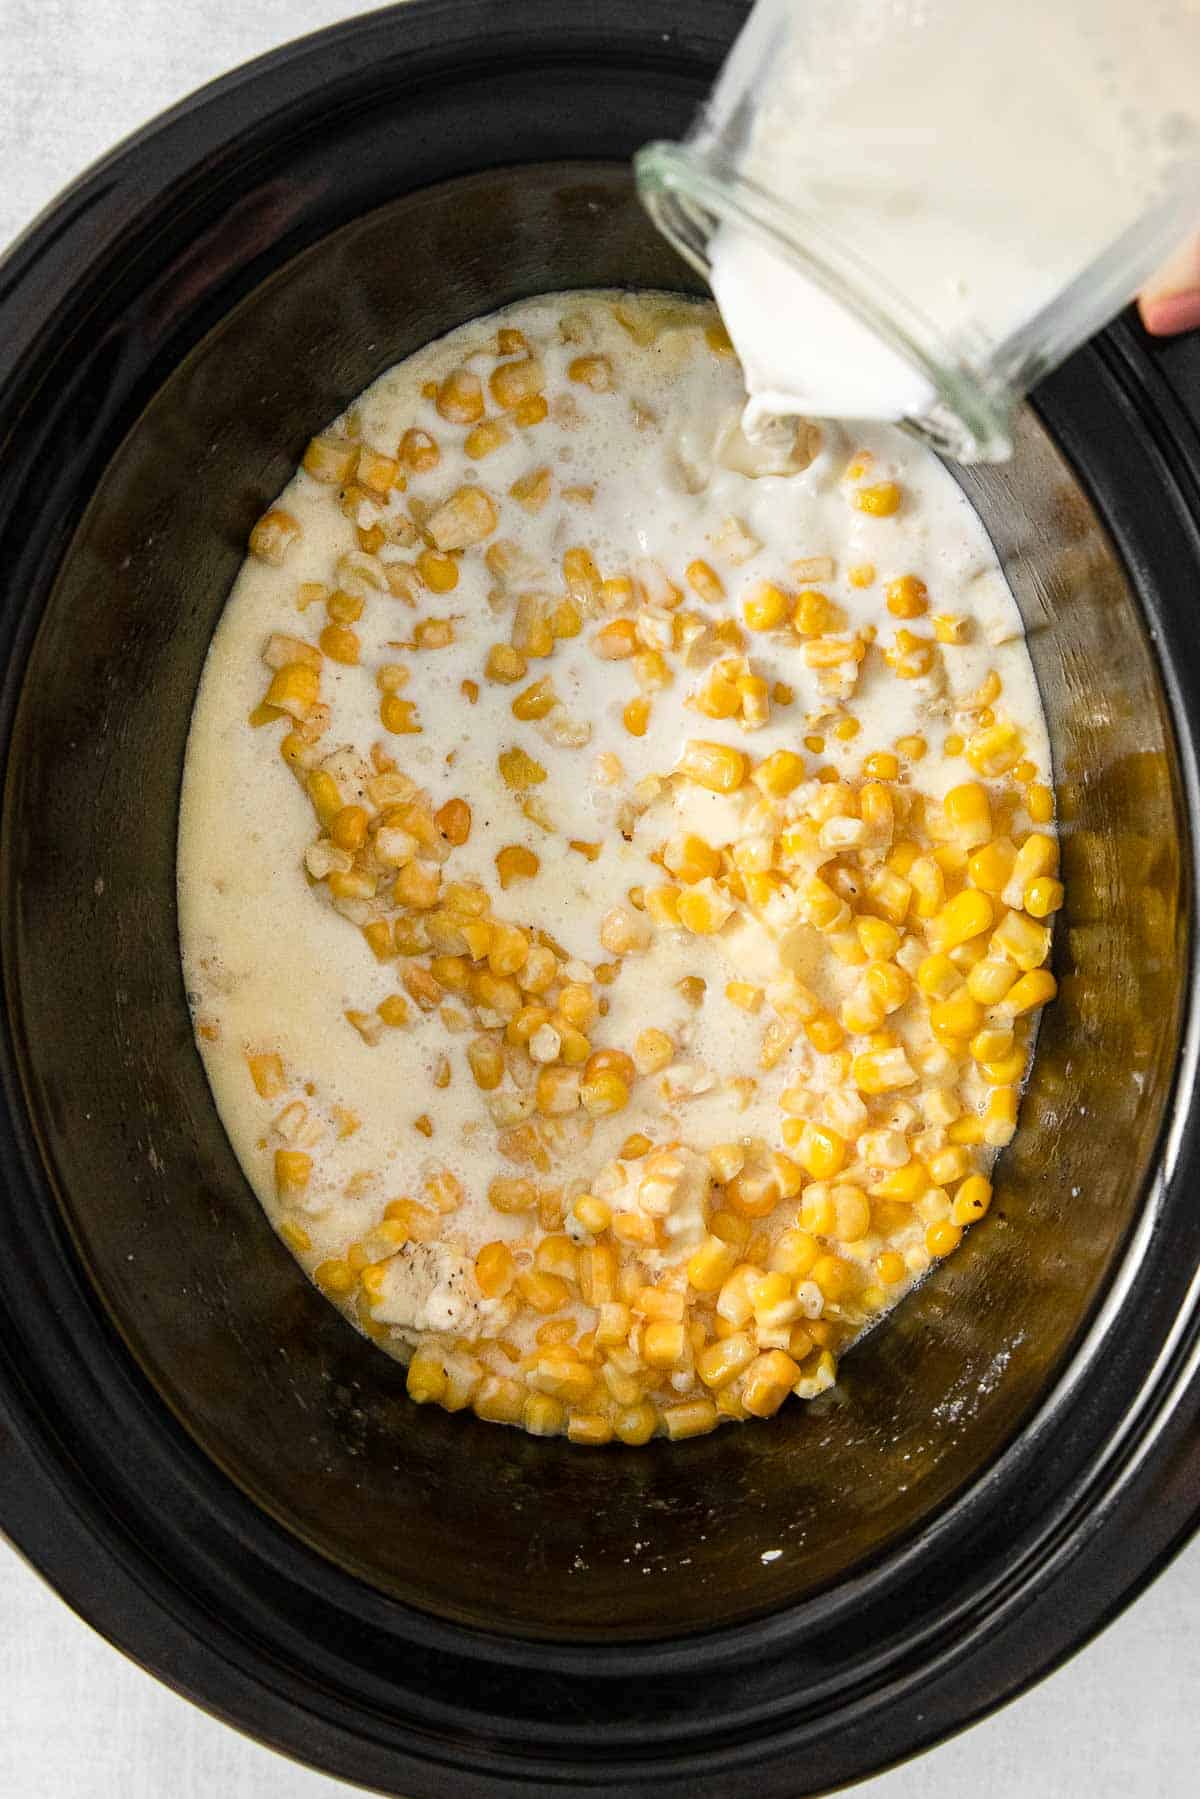 Corn, heavy cream, cubed butter, granulated sugar, salt and pepper added to crockpot for cooking.